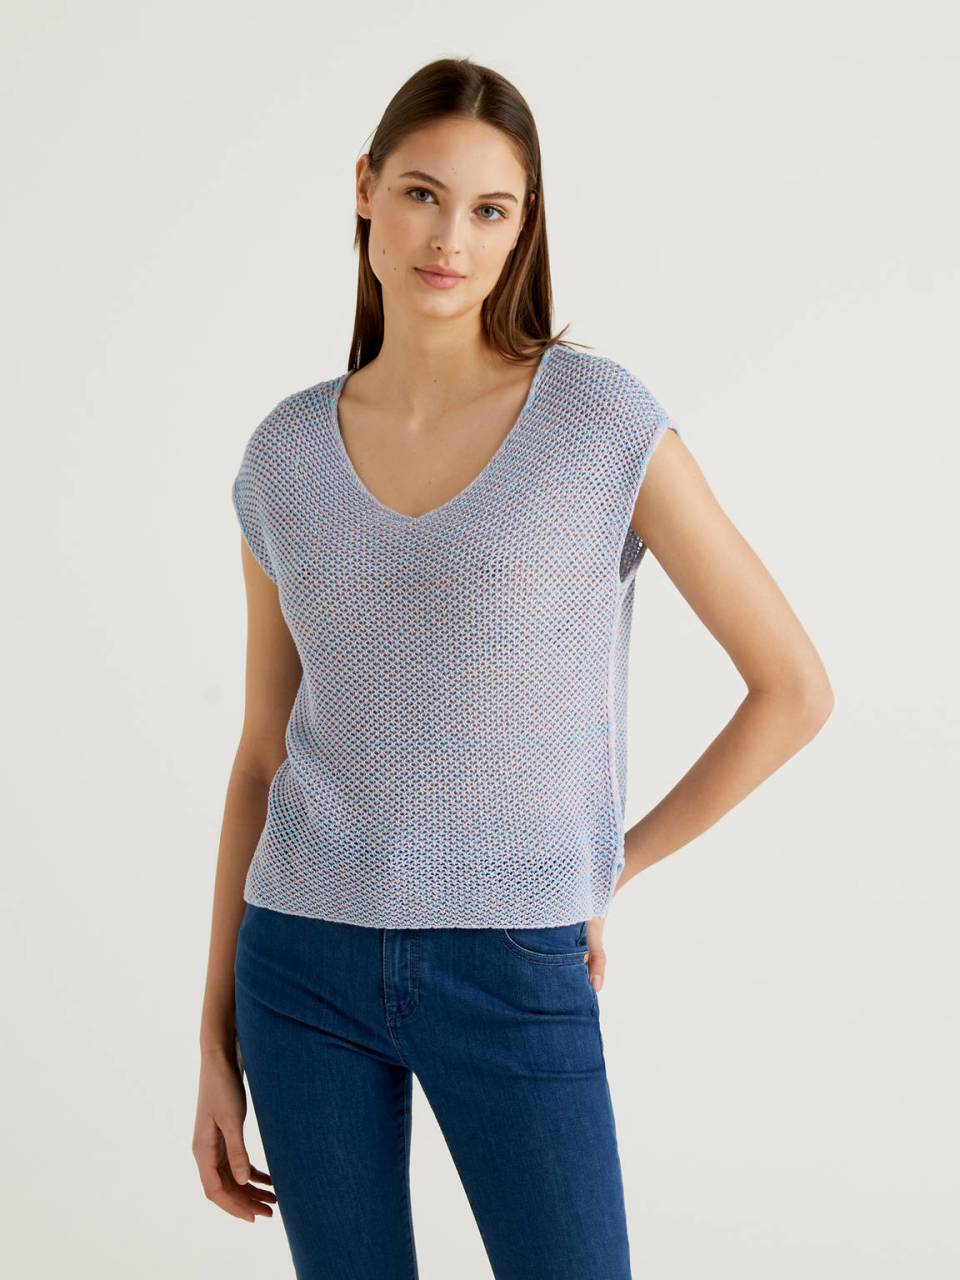 Benetton Mesh knit sweater in 100% cotton. 1